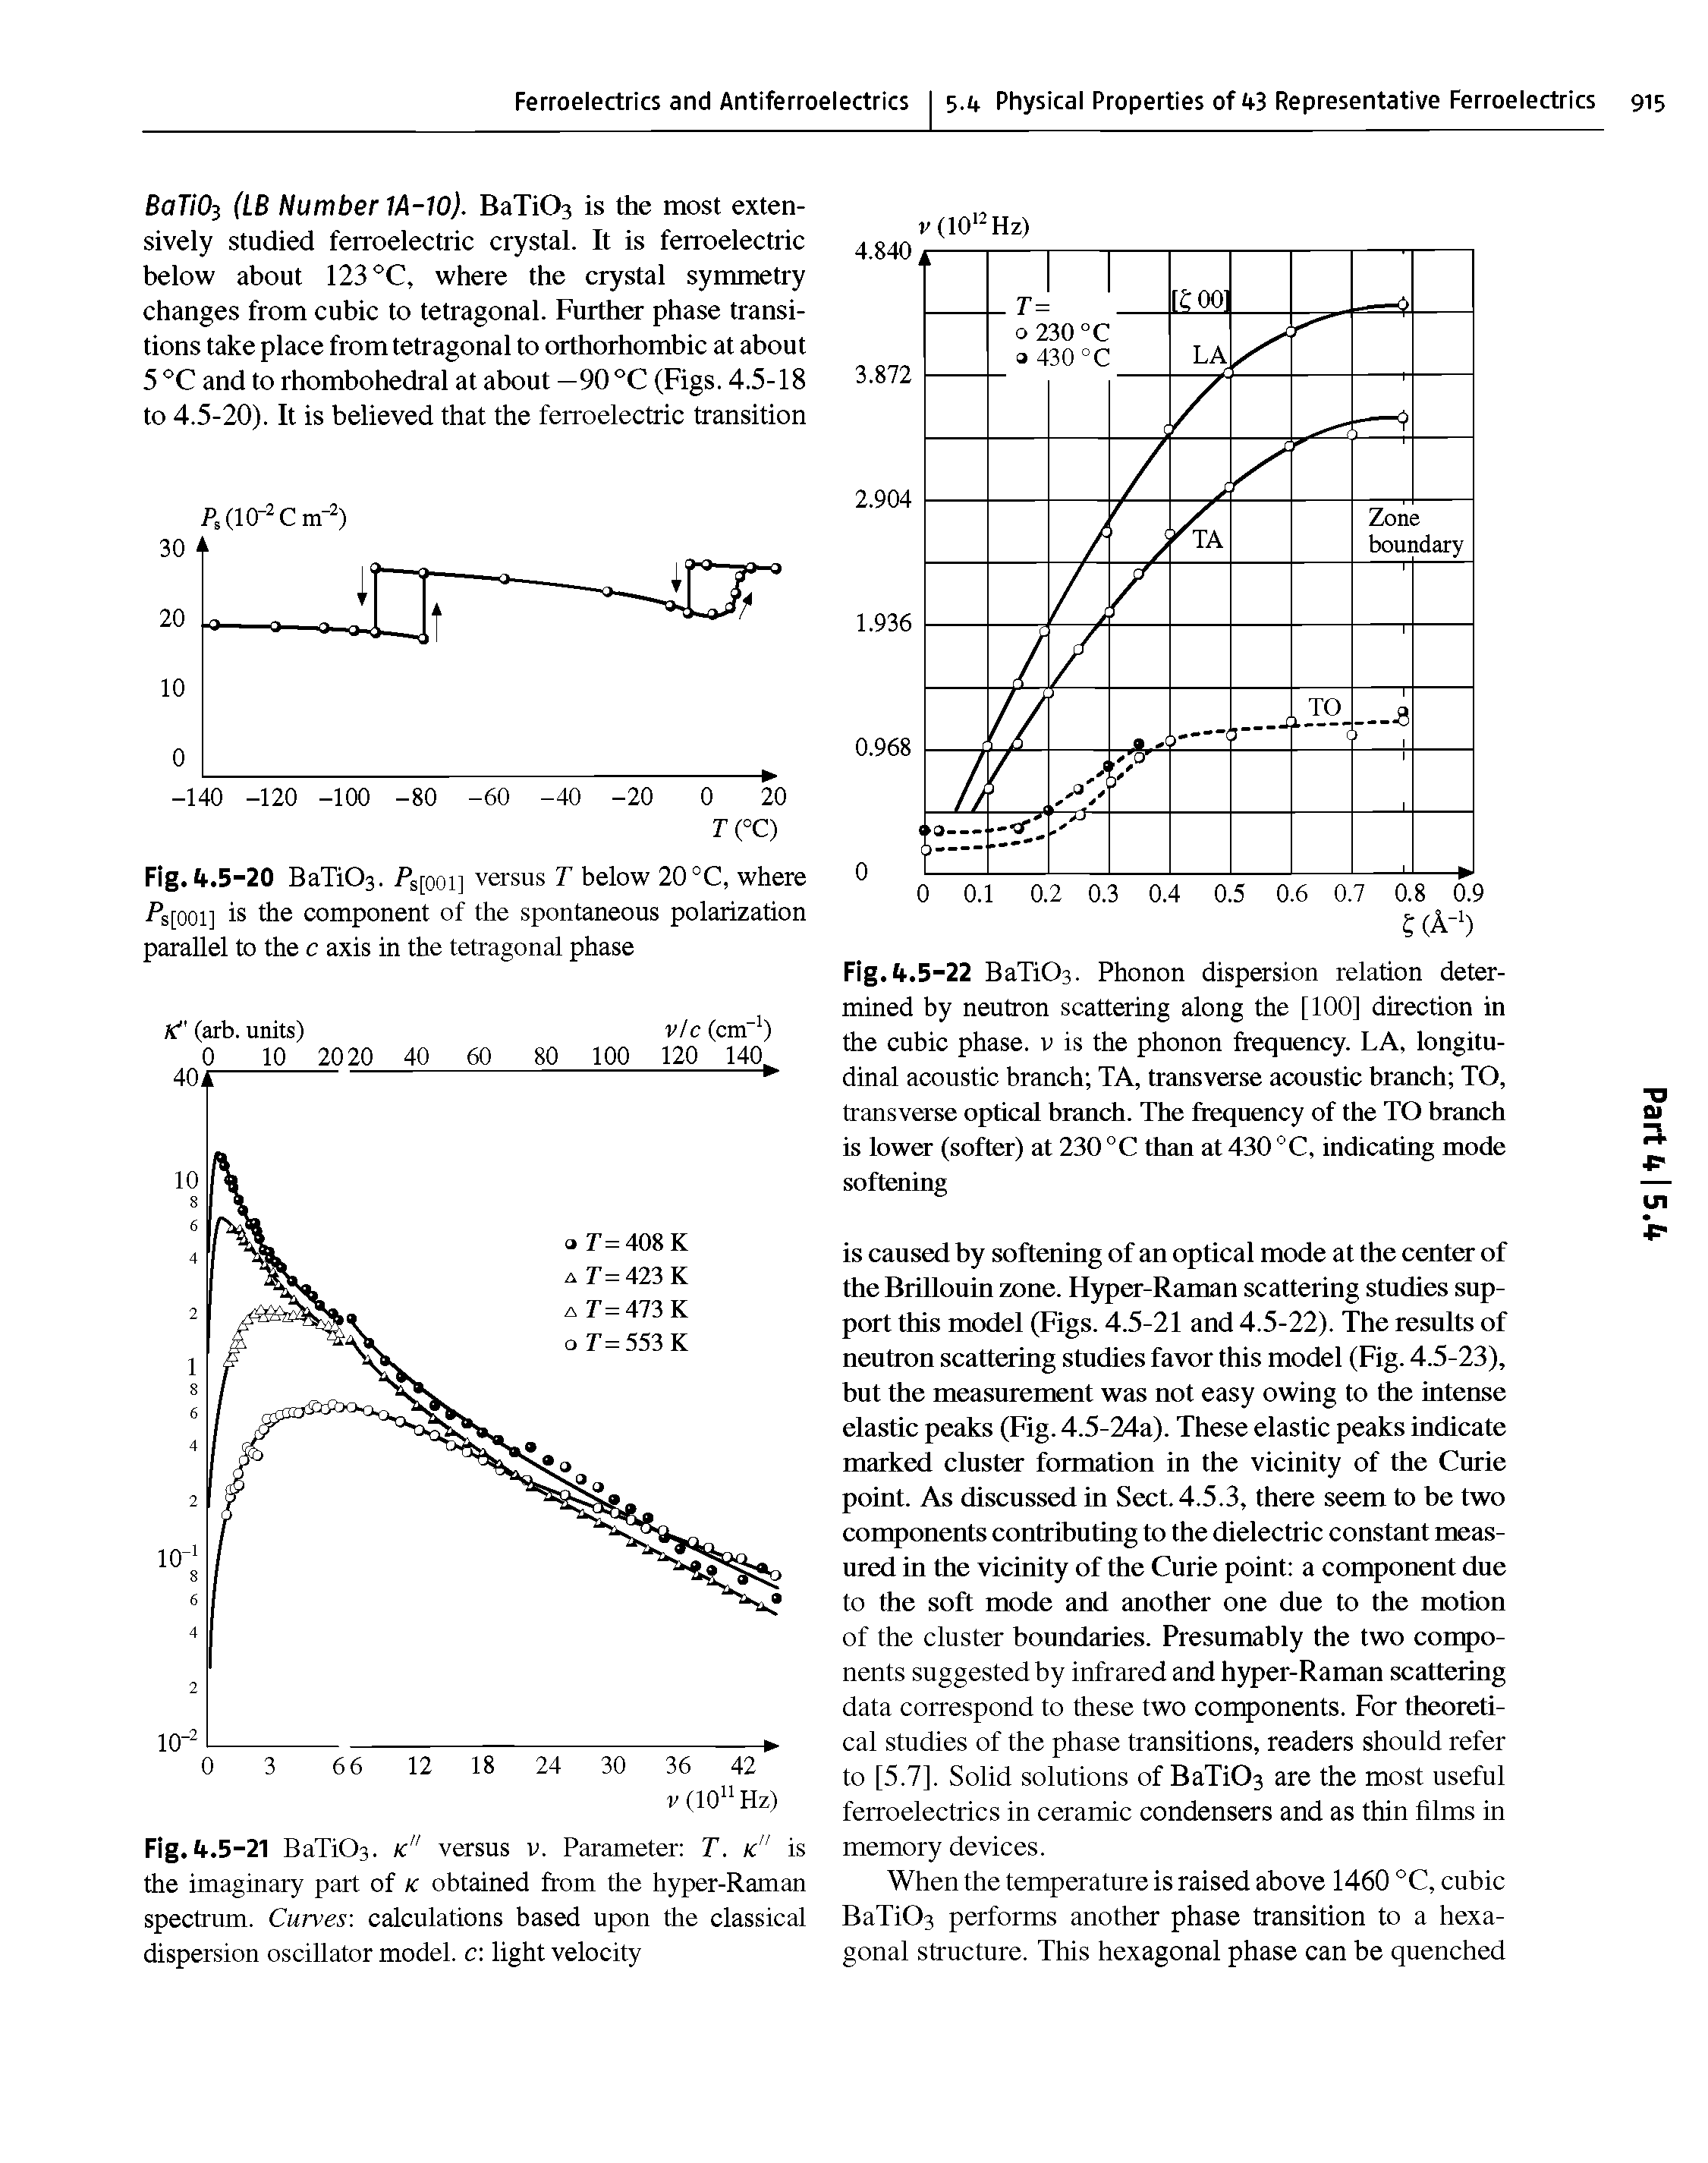 Fig. A.5-22 BaTiOs. Phonon dispersion relation determined by neutron scattering along the [100] direction in the cubic phase, v is the phonon frequency. LA, longitudinal acoustic branch TA, transverse acoustic branch TO, transverse optical branch. The frequency of the TO branch is lower (softer) at 230 °C than at 430 " C, indicating mode softening...